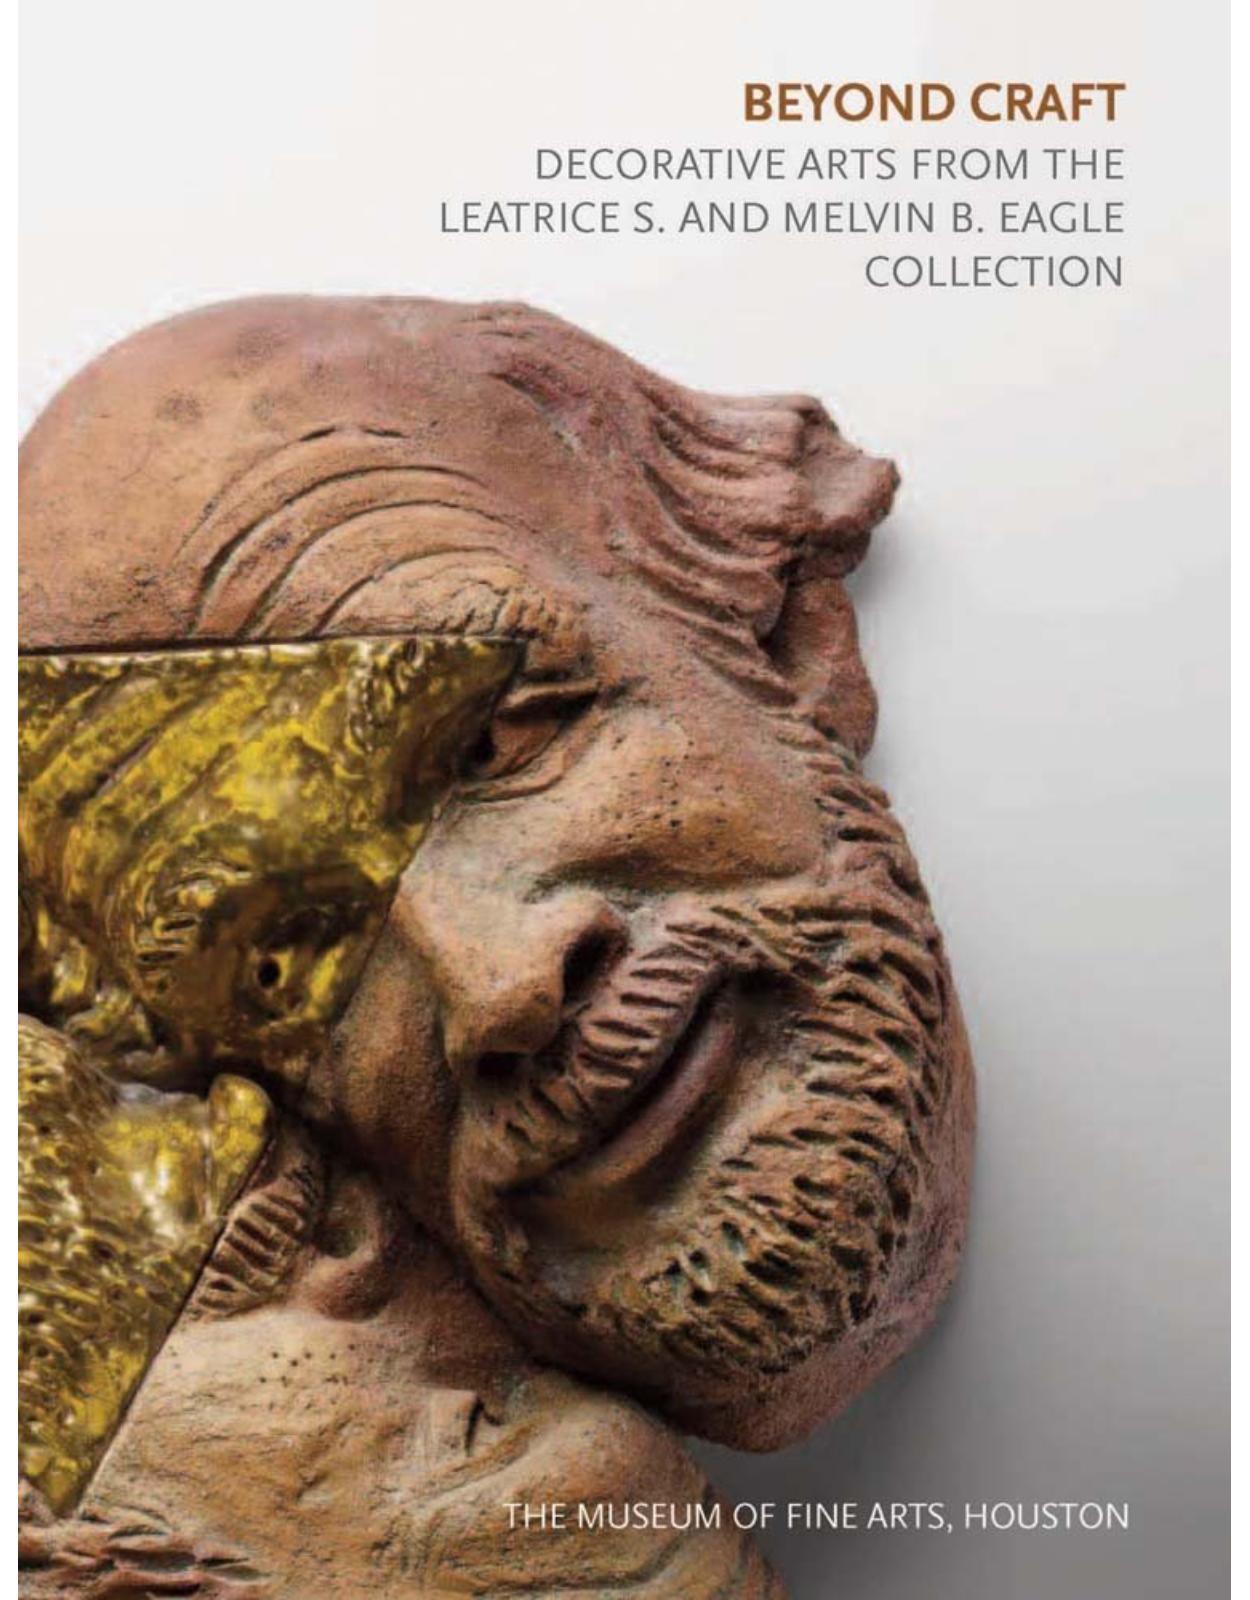 Beyond Craft. Decorative Arts from the Leatrice S. and Melvin B. Eagle Collection